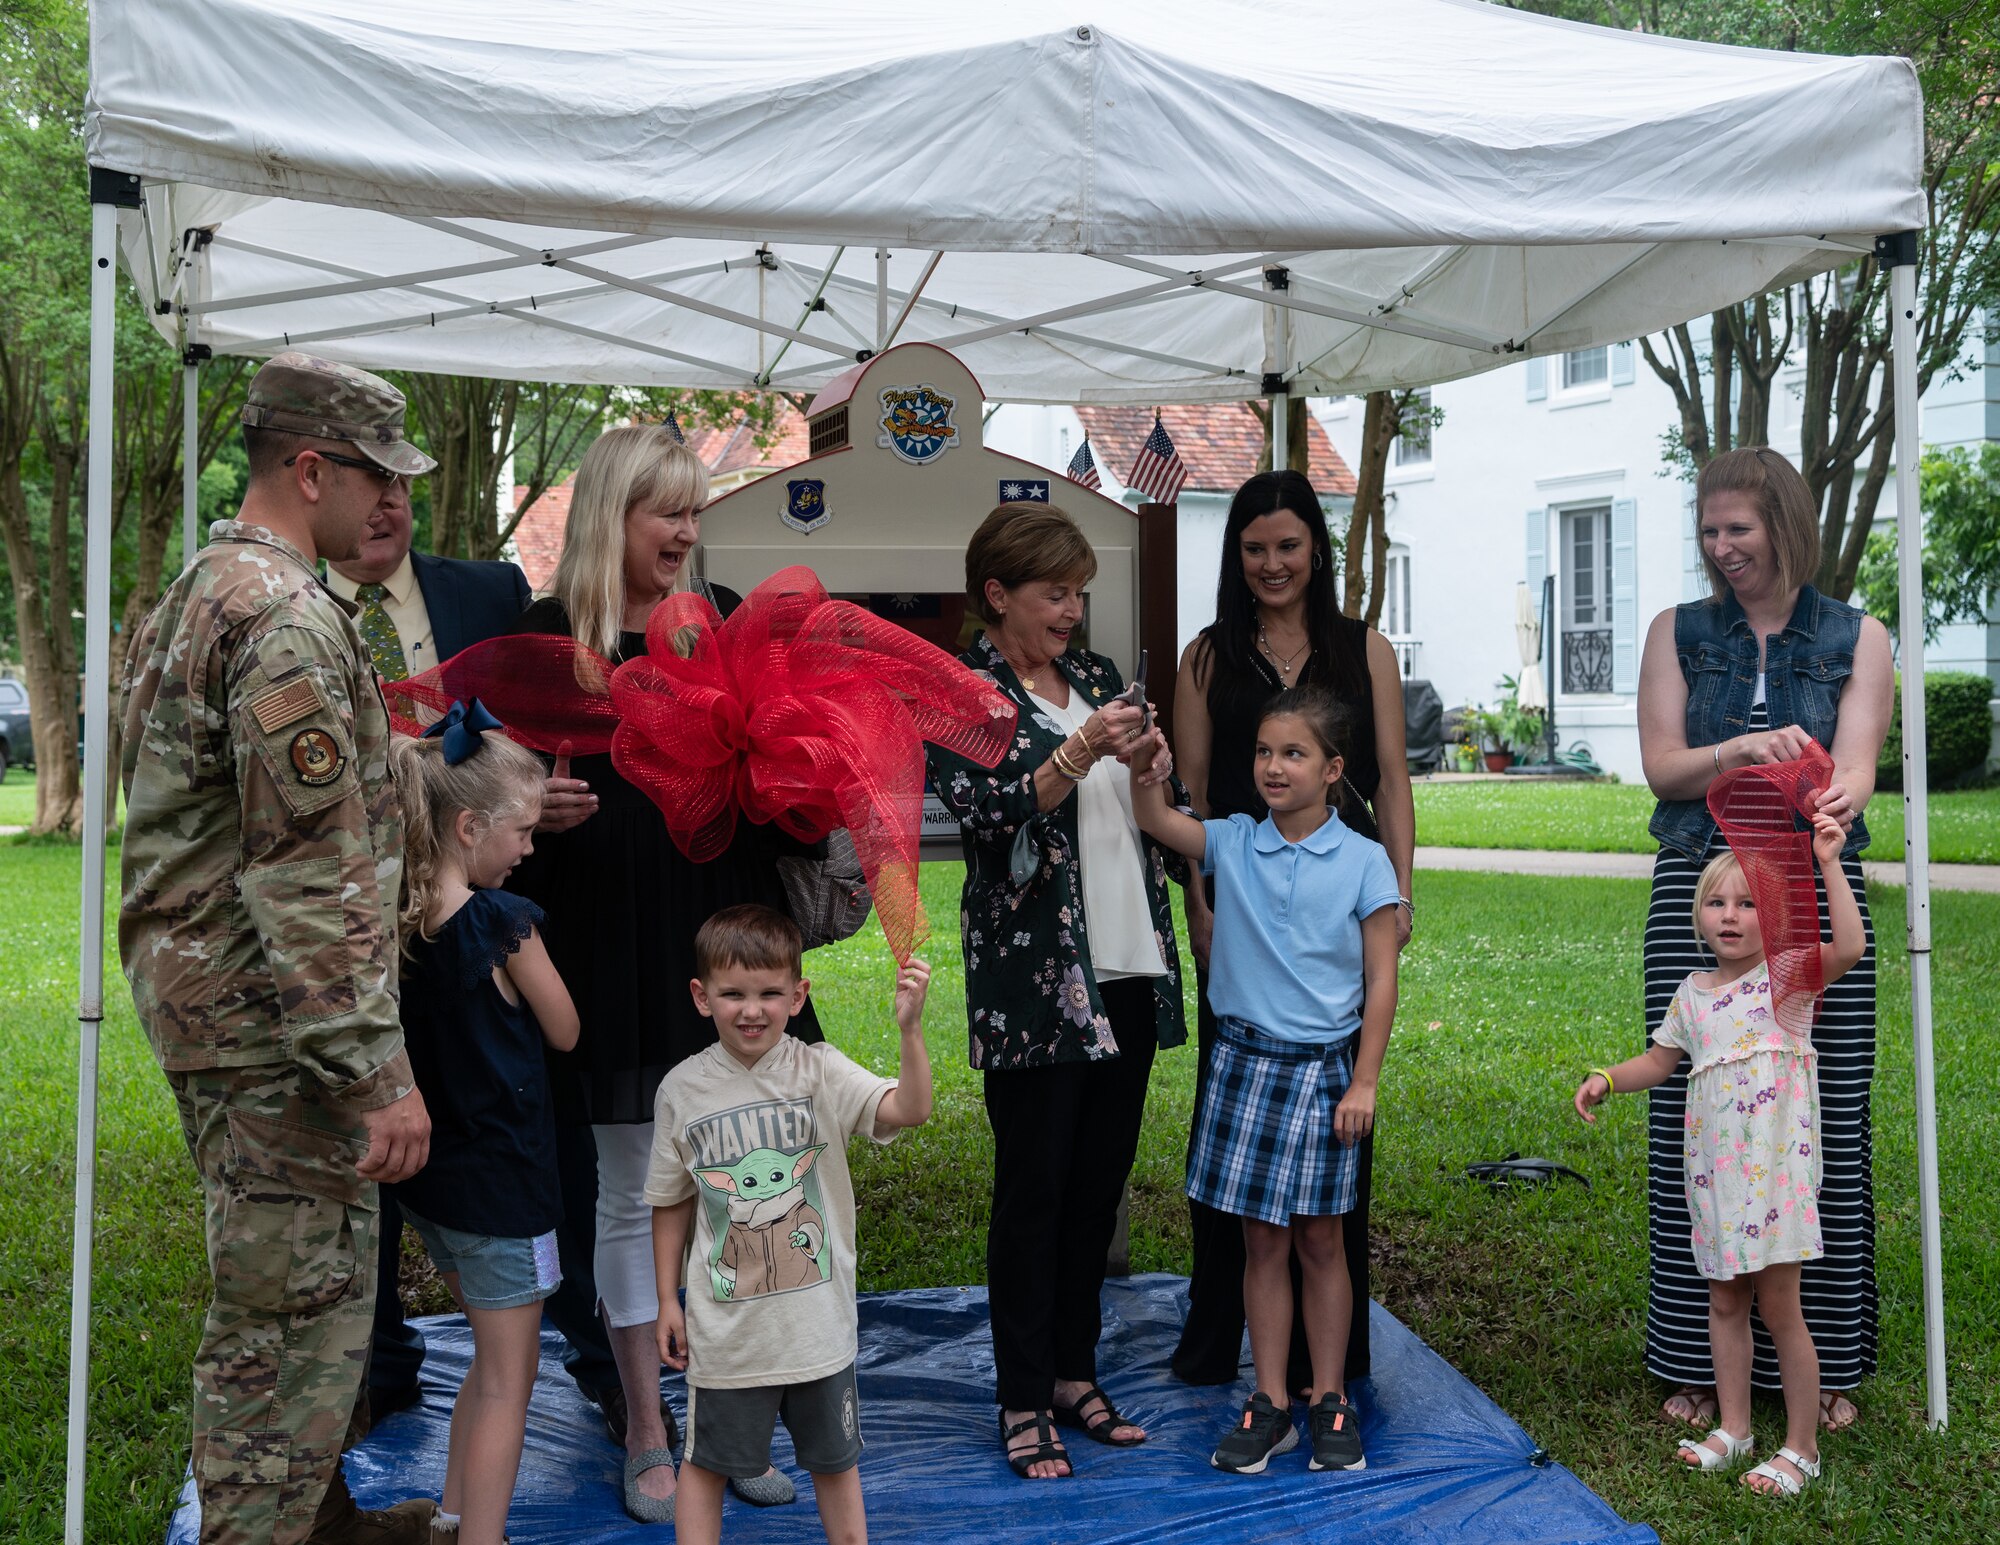 Nell Calloway, president of the Chennault Museum, cuts a ribbon to officially open the new community book exchange box at Barksdale Air Force Base, June 8, 2021. Calloway is the granddaughter of Lt. Gen. Claire Chennault, to whom the book exchange box is dedicated